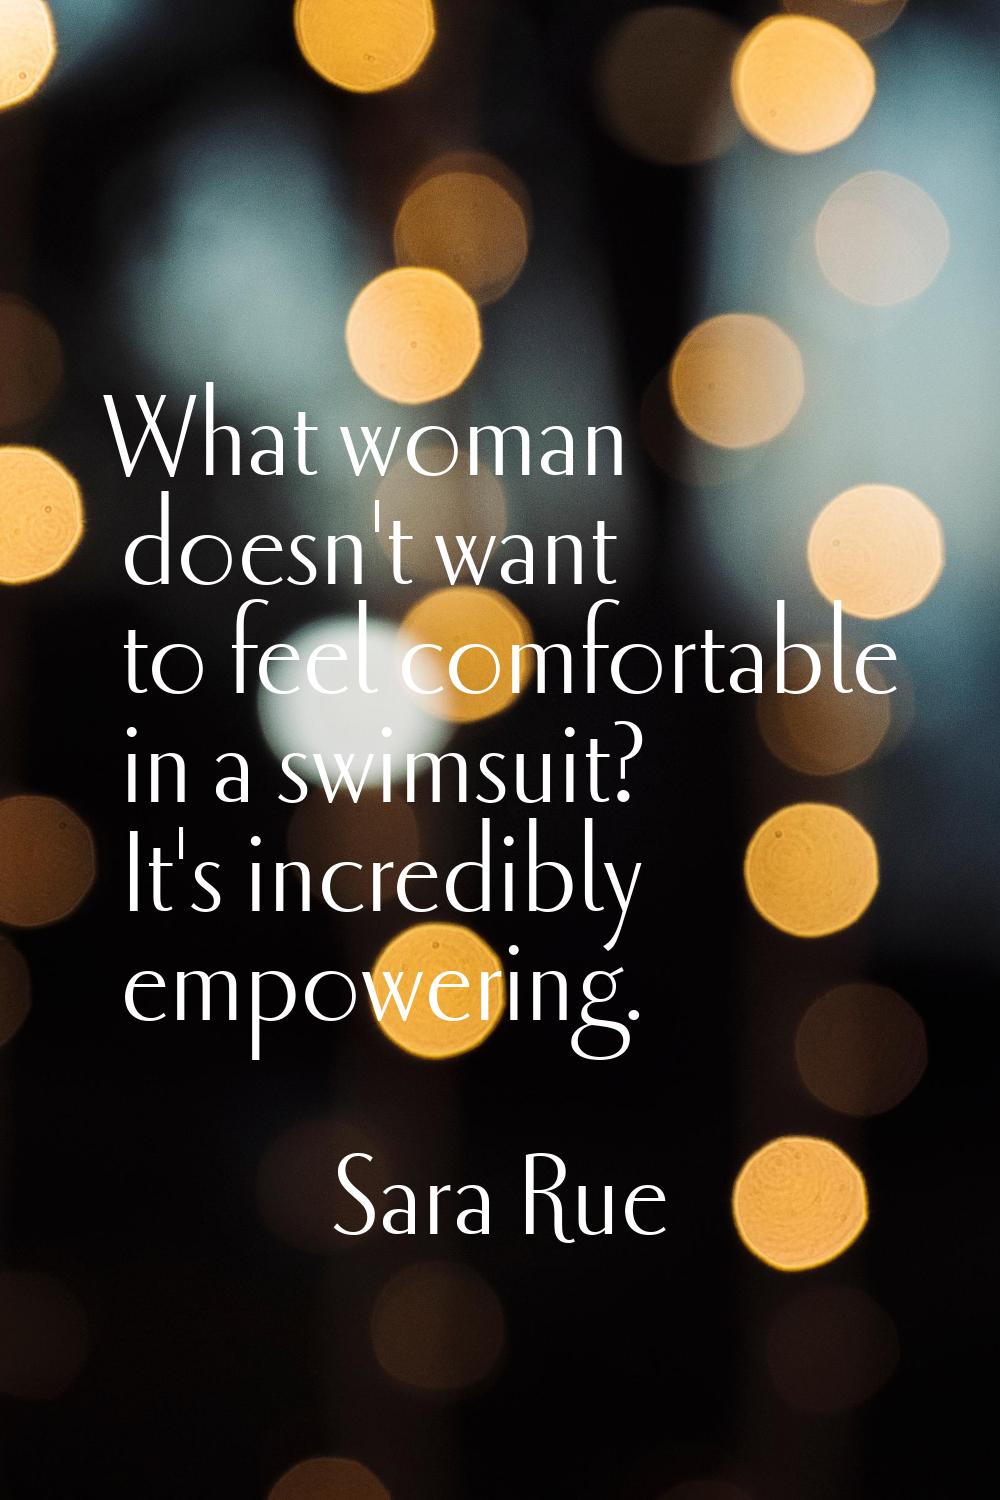 What woman doesn't want to feel comfortable in a swimsuit? It's incredibly empowering.